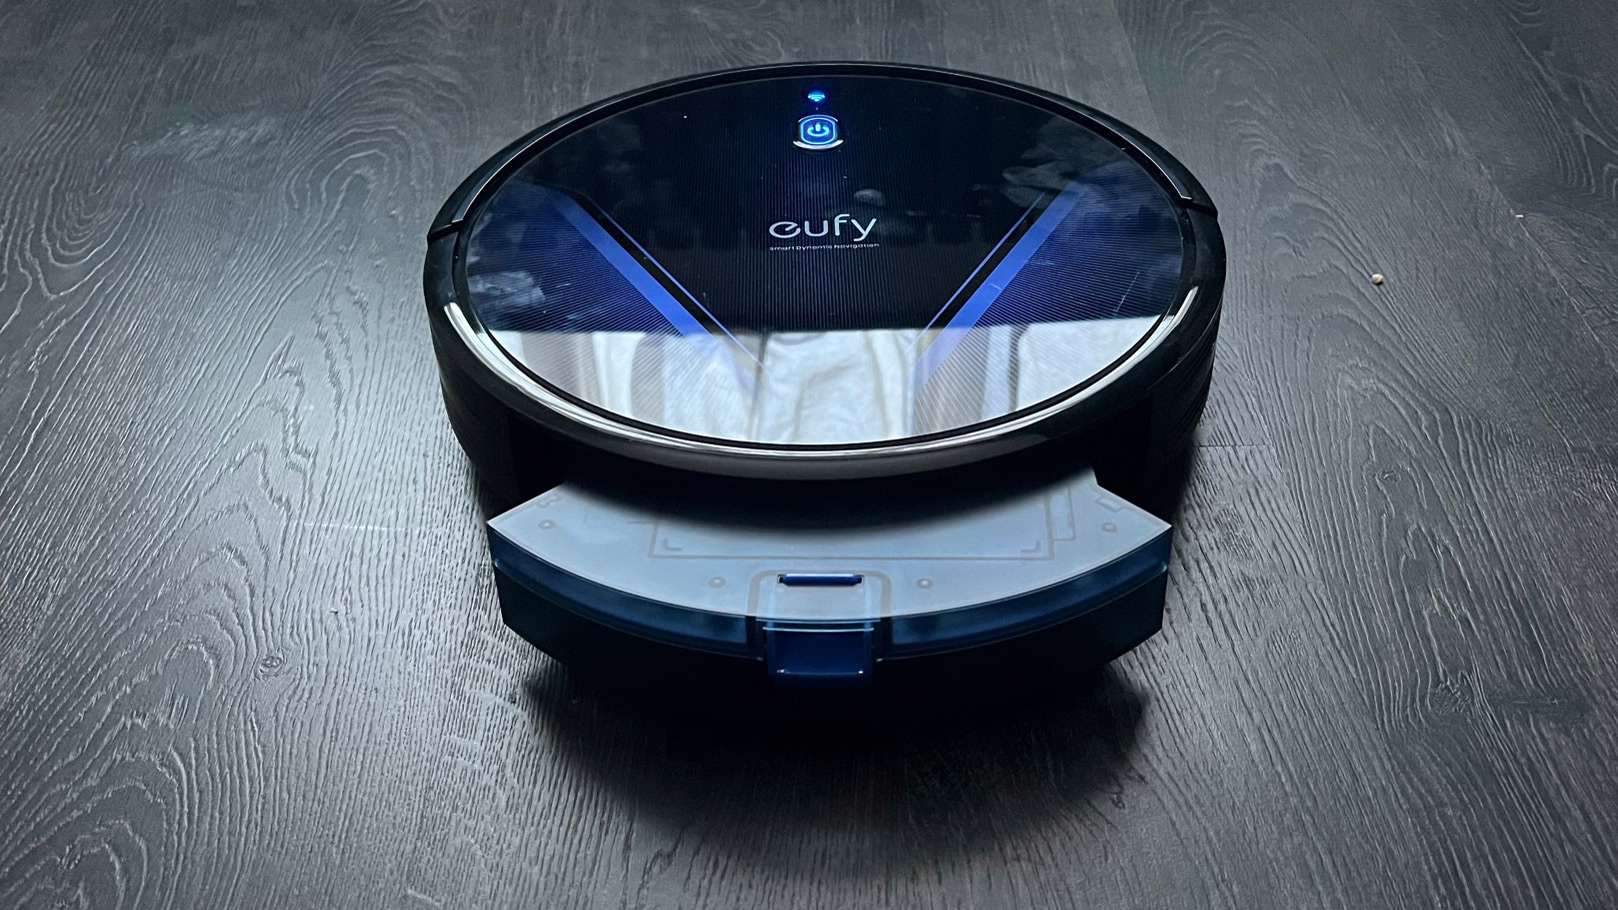 The Eufy RoboVac G20 with dust box partially removed